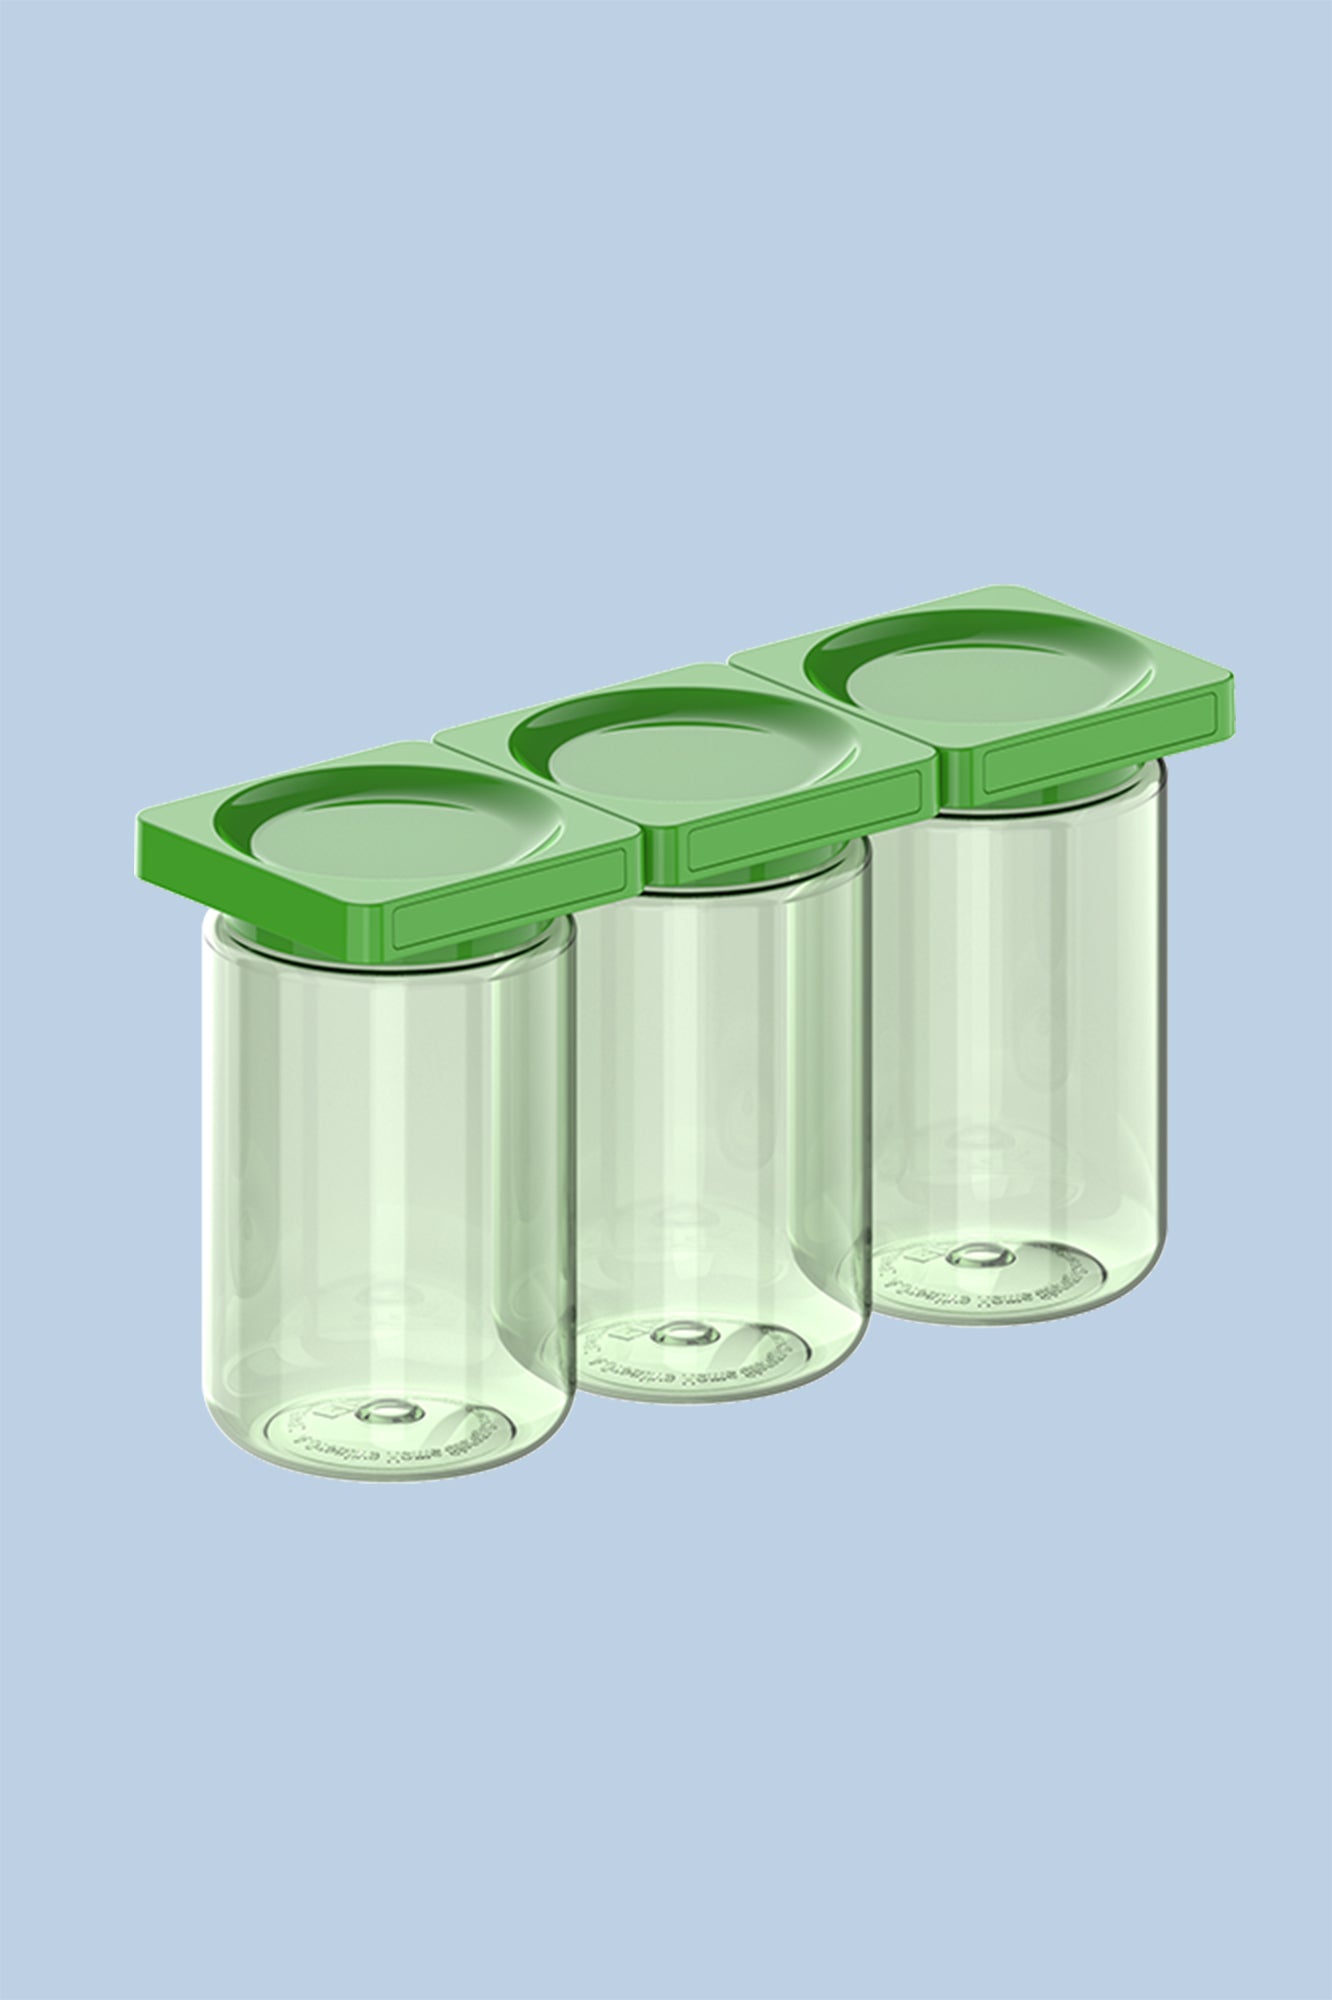 Medium 3-Pack Container by Cliik - Green